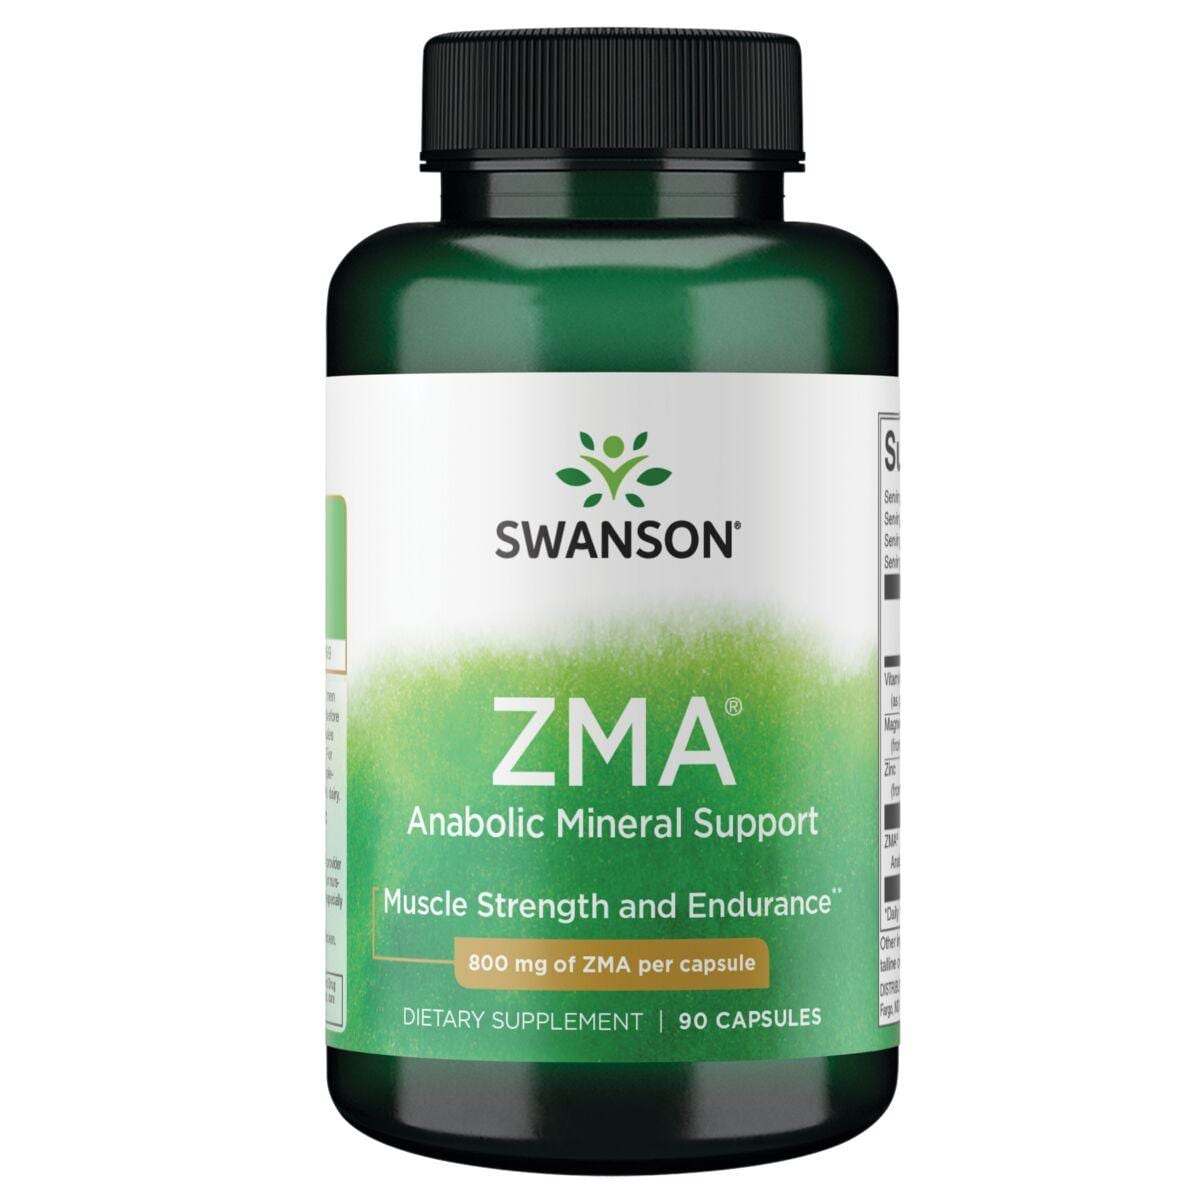 Swanson Ultra Zma Anabolic Mineral Support Vitamin 800 mg 90 Caps